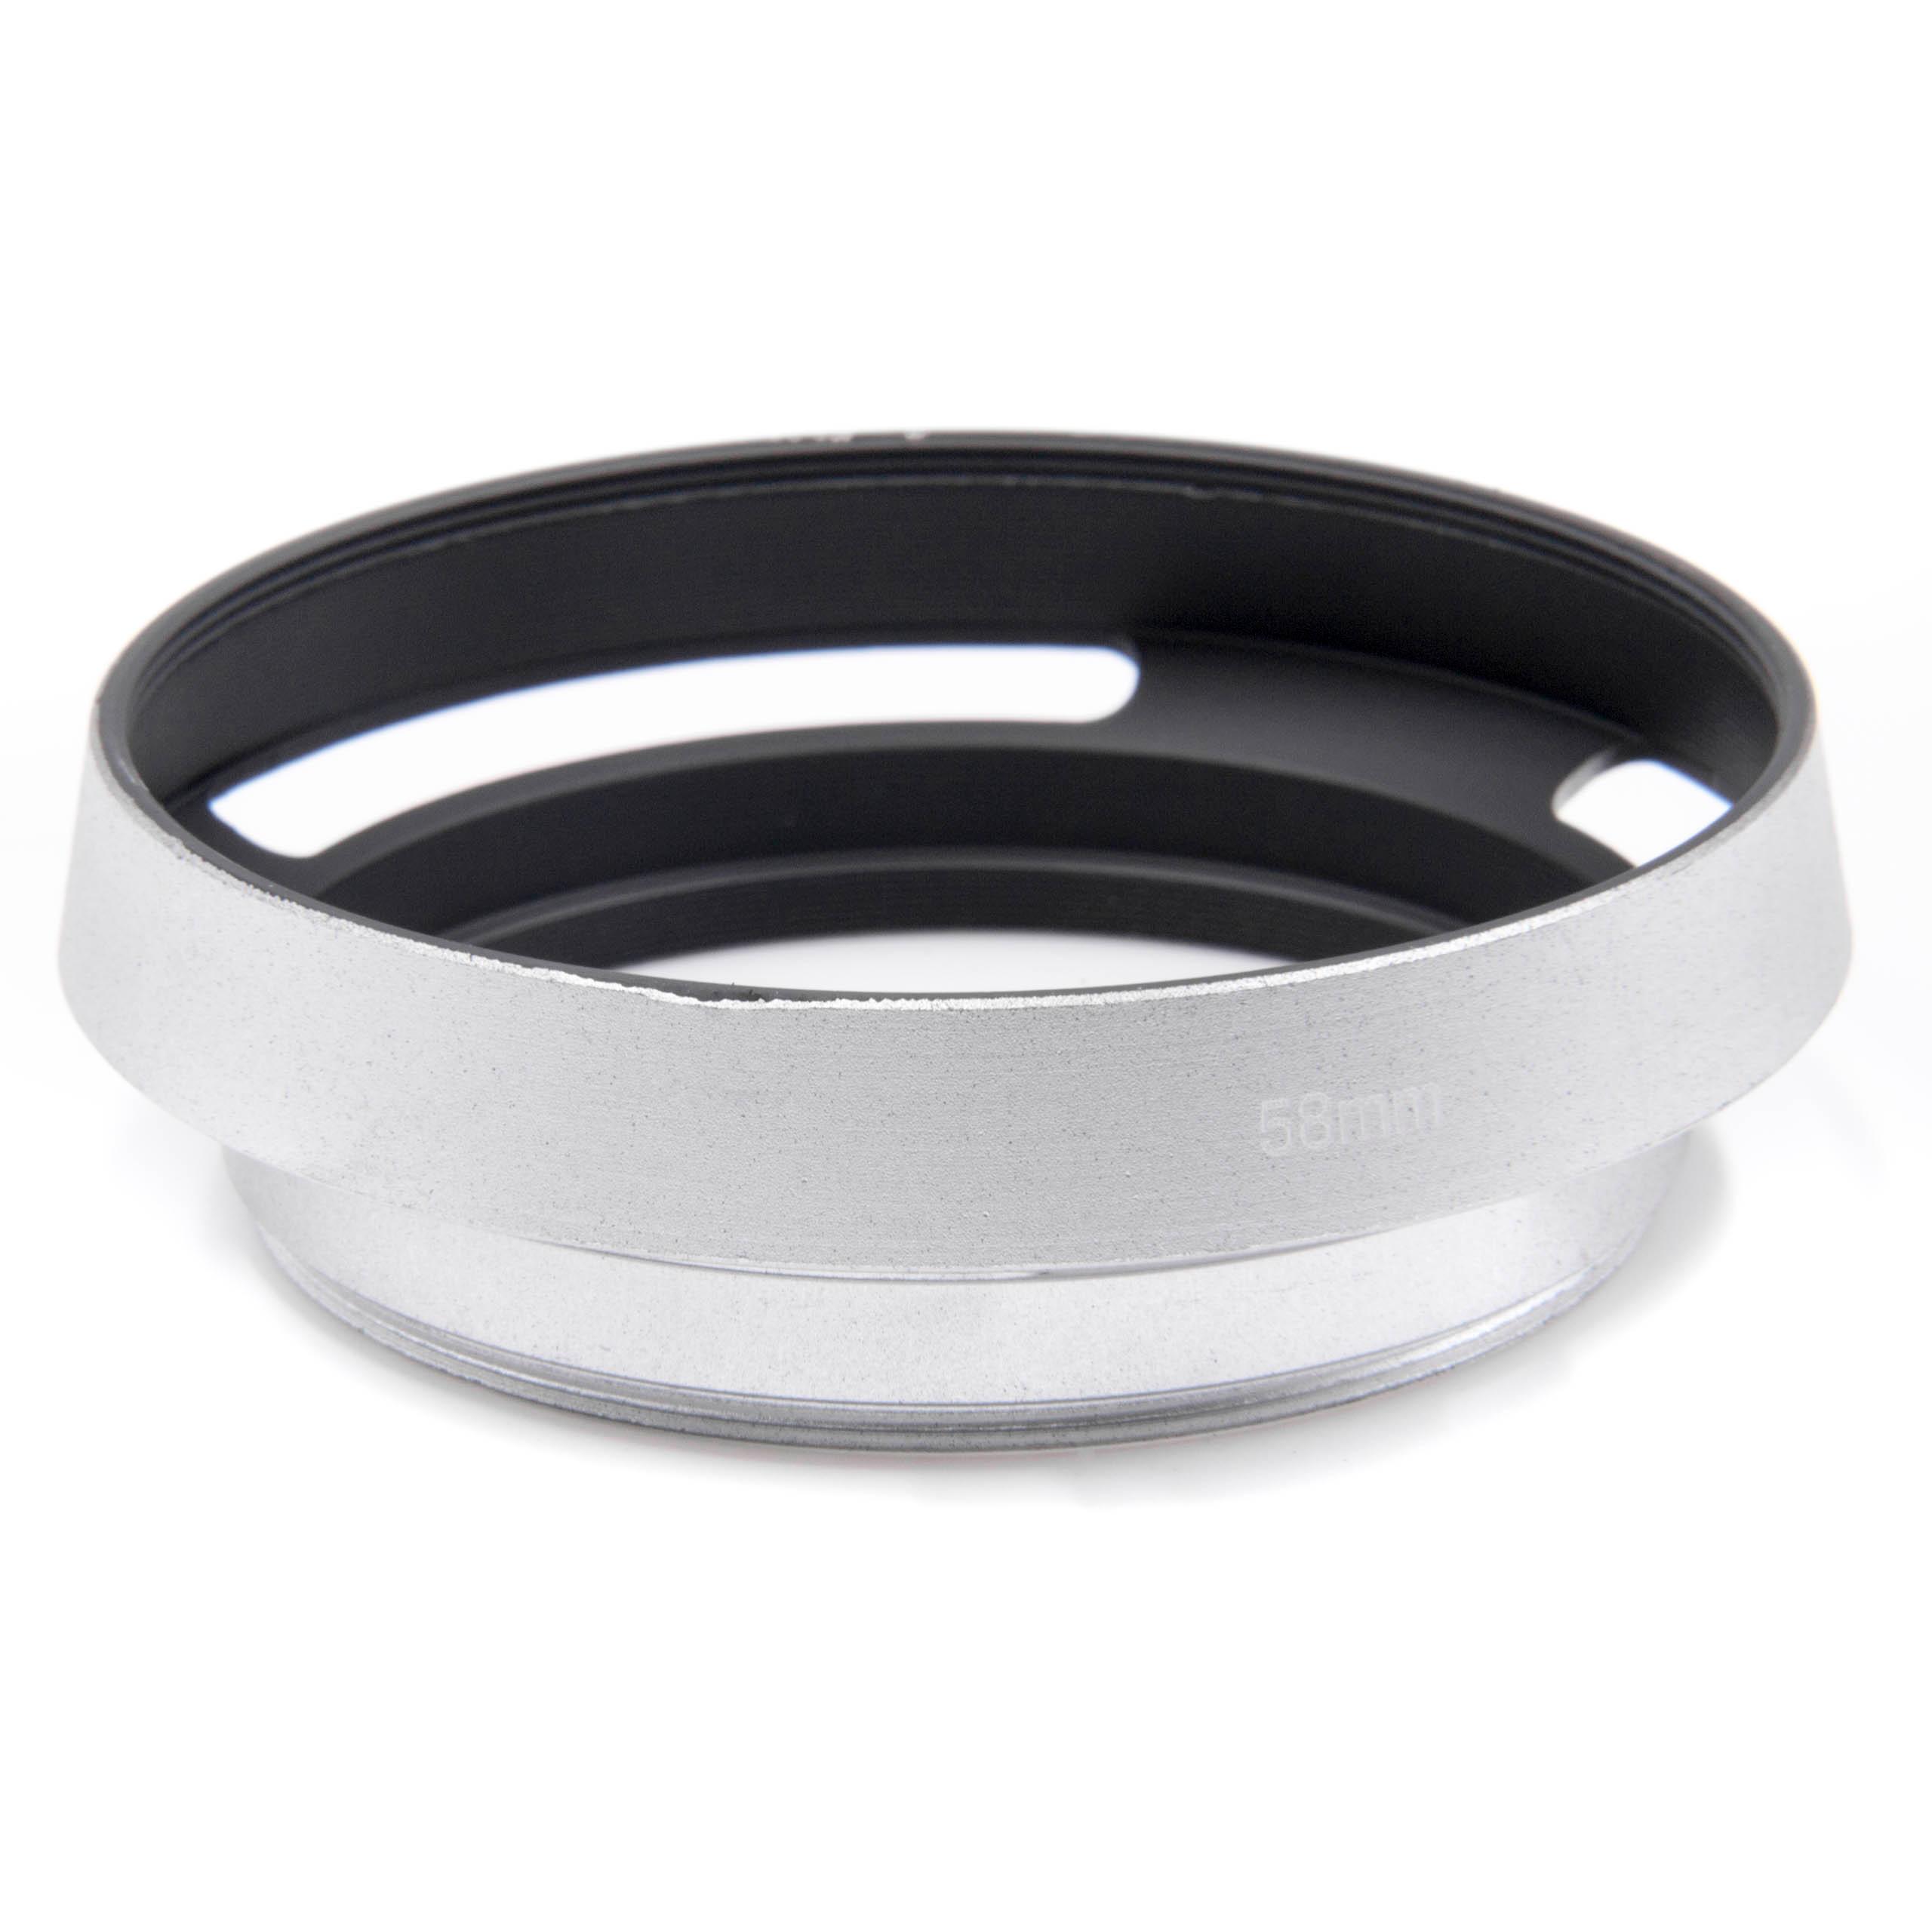 Lens Hood suitable for 58mm Lens - Lens Shade Silver, Round